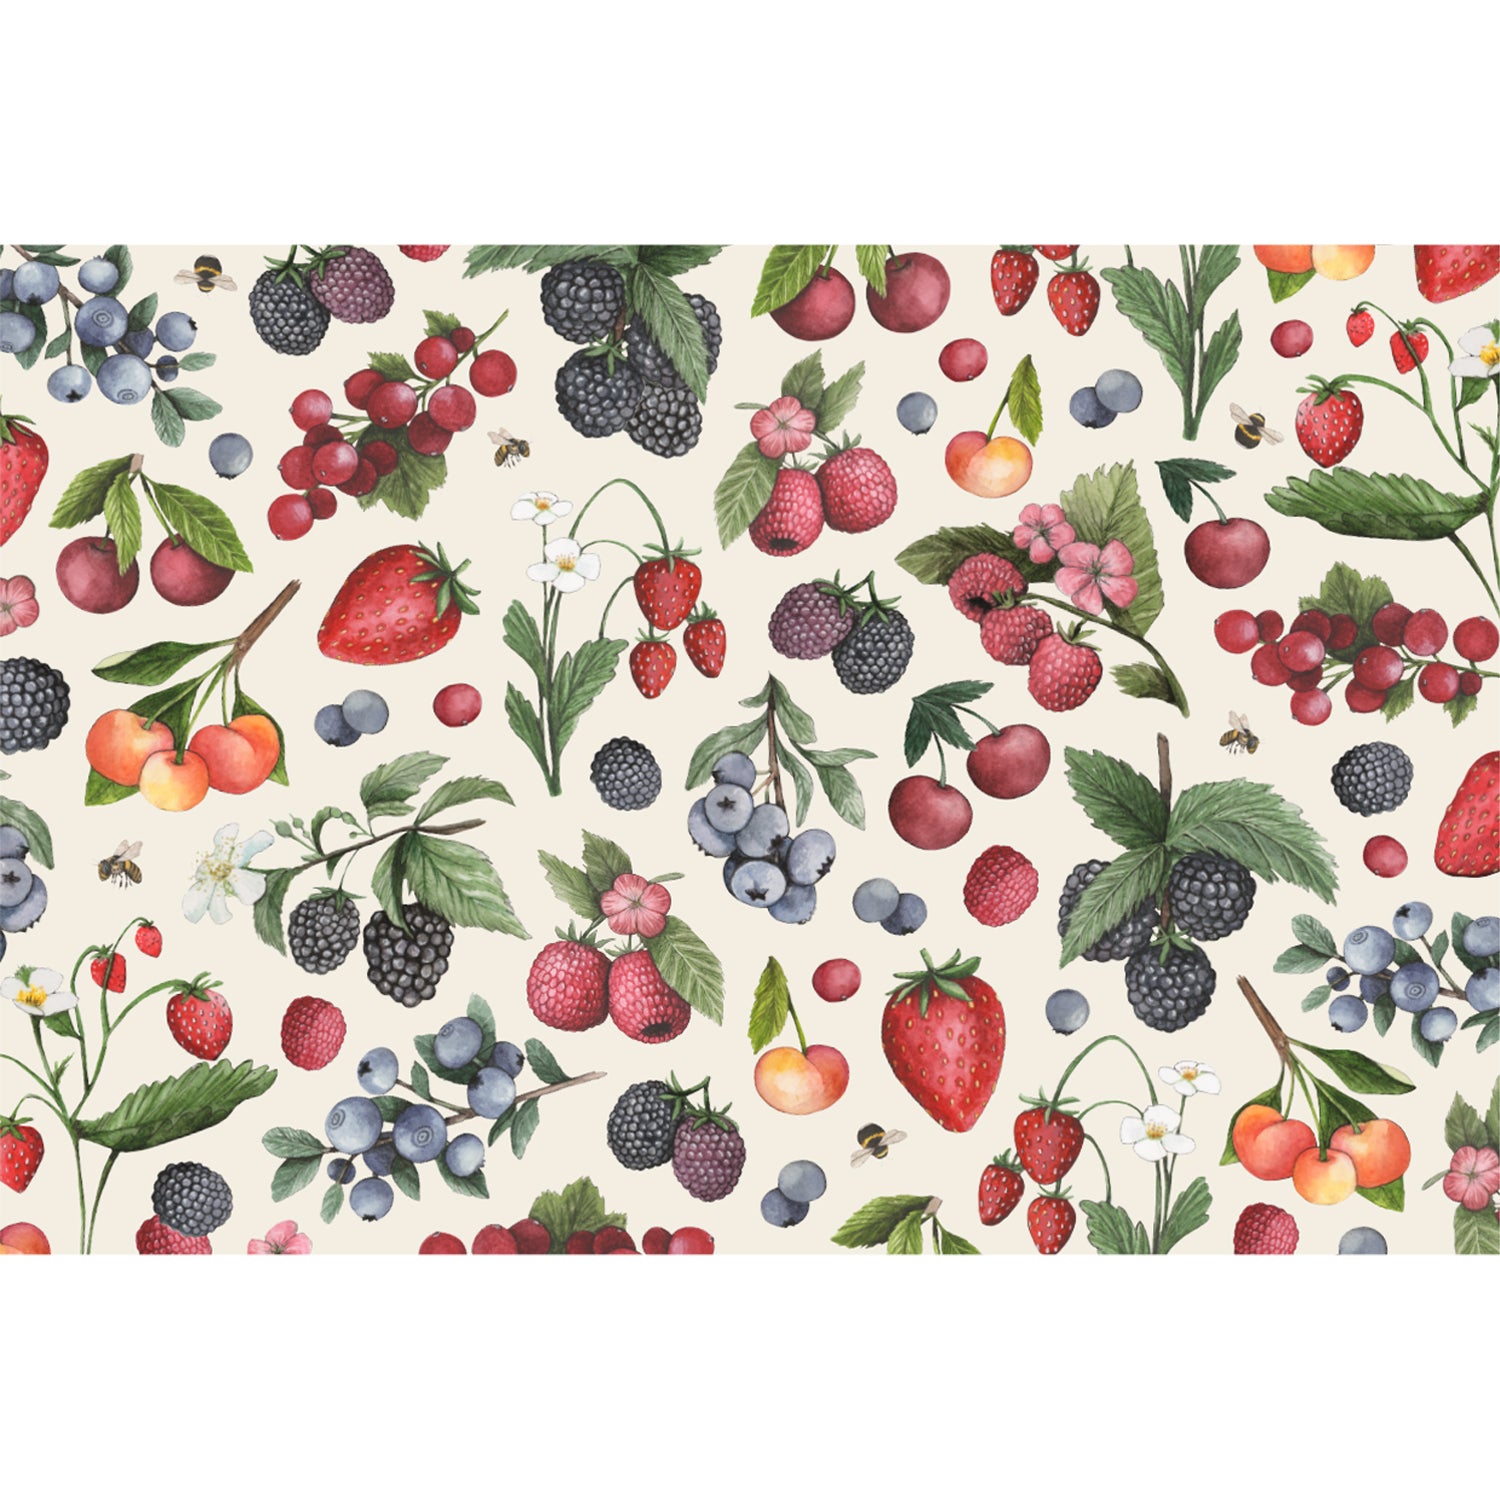 A Wild Berry Placemat of berries and leaves perfect for a summer setting picnic by Hester &amp; Cook.